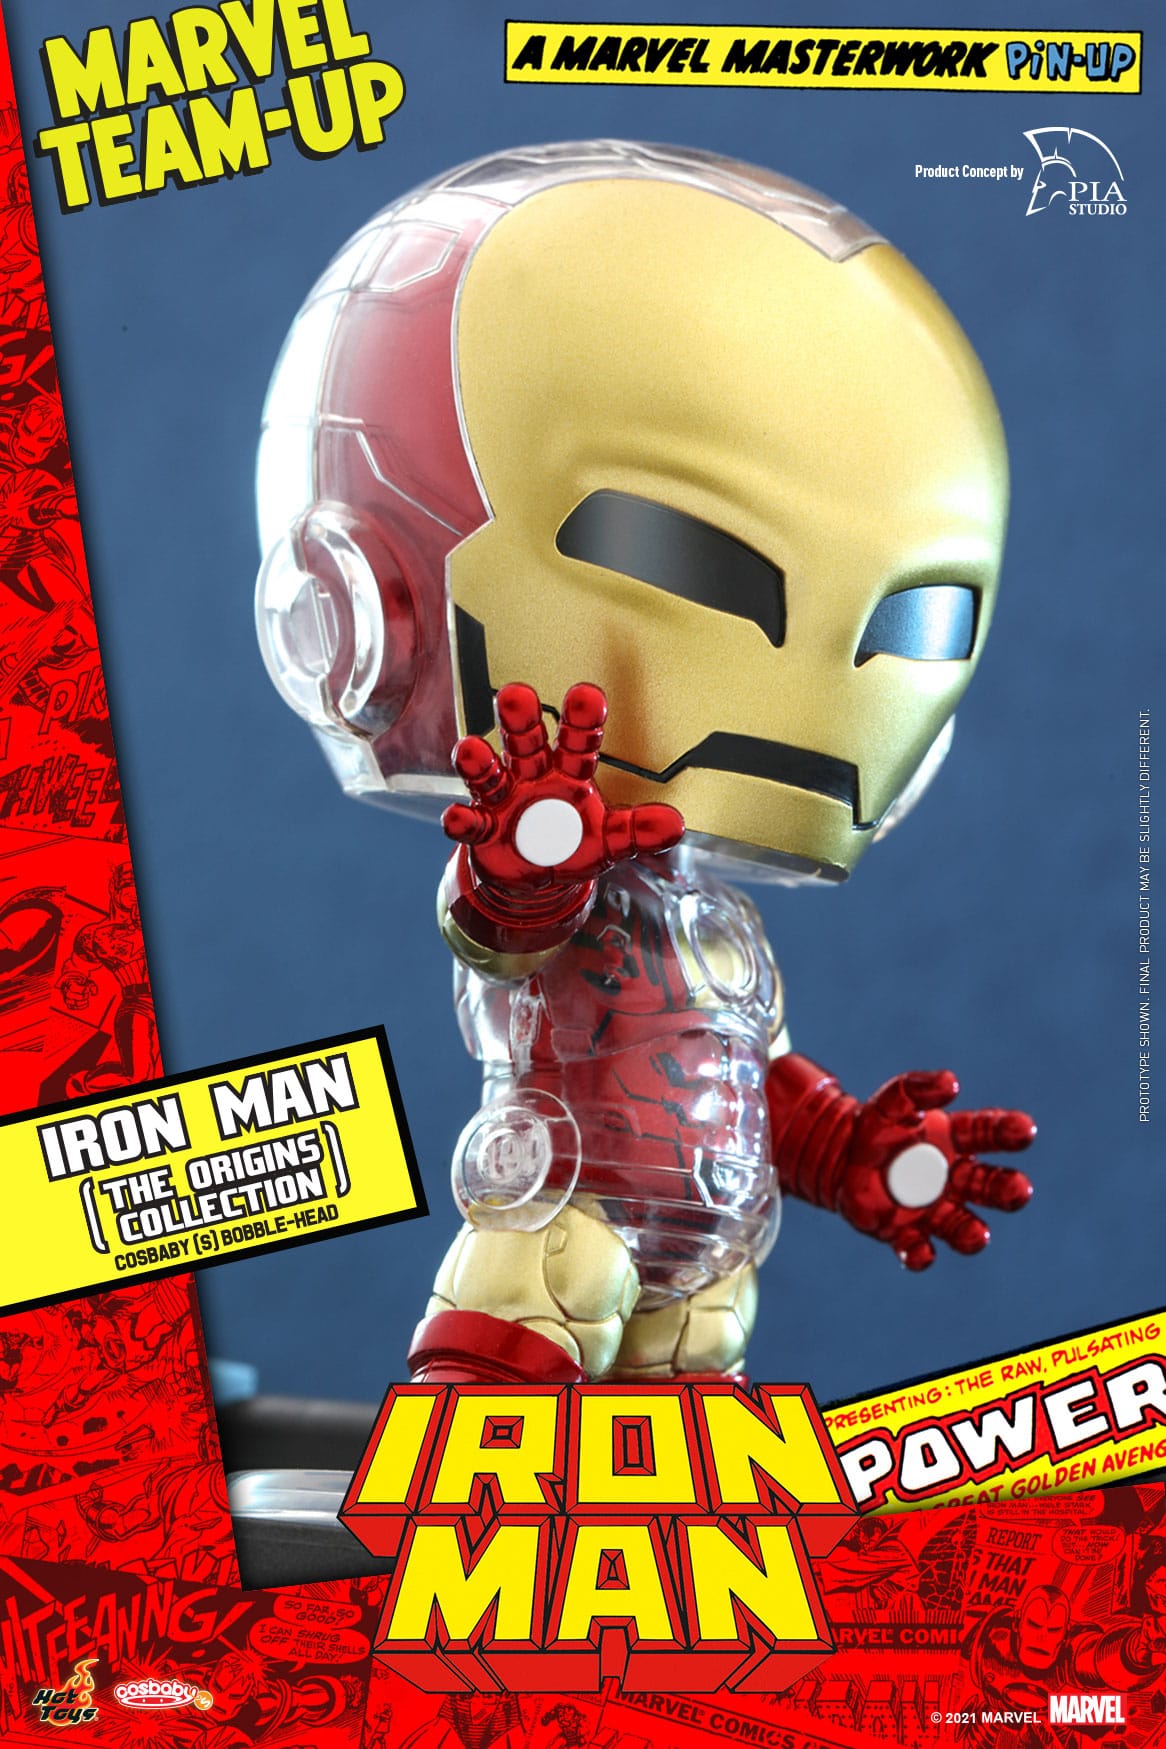 Iron Man (Origins Collection) Cosbaby